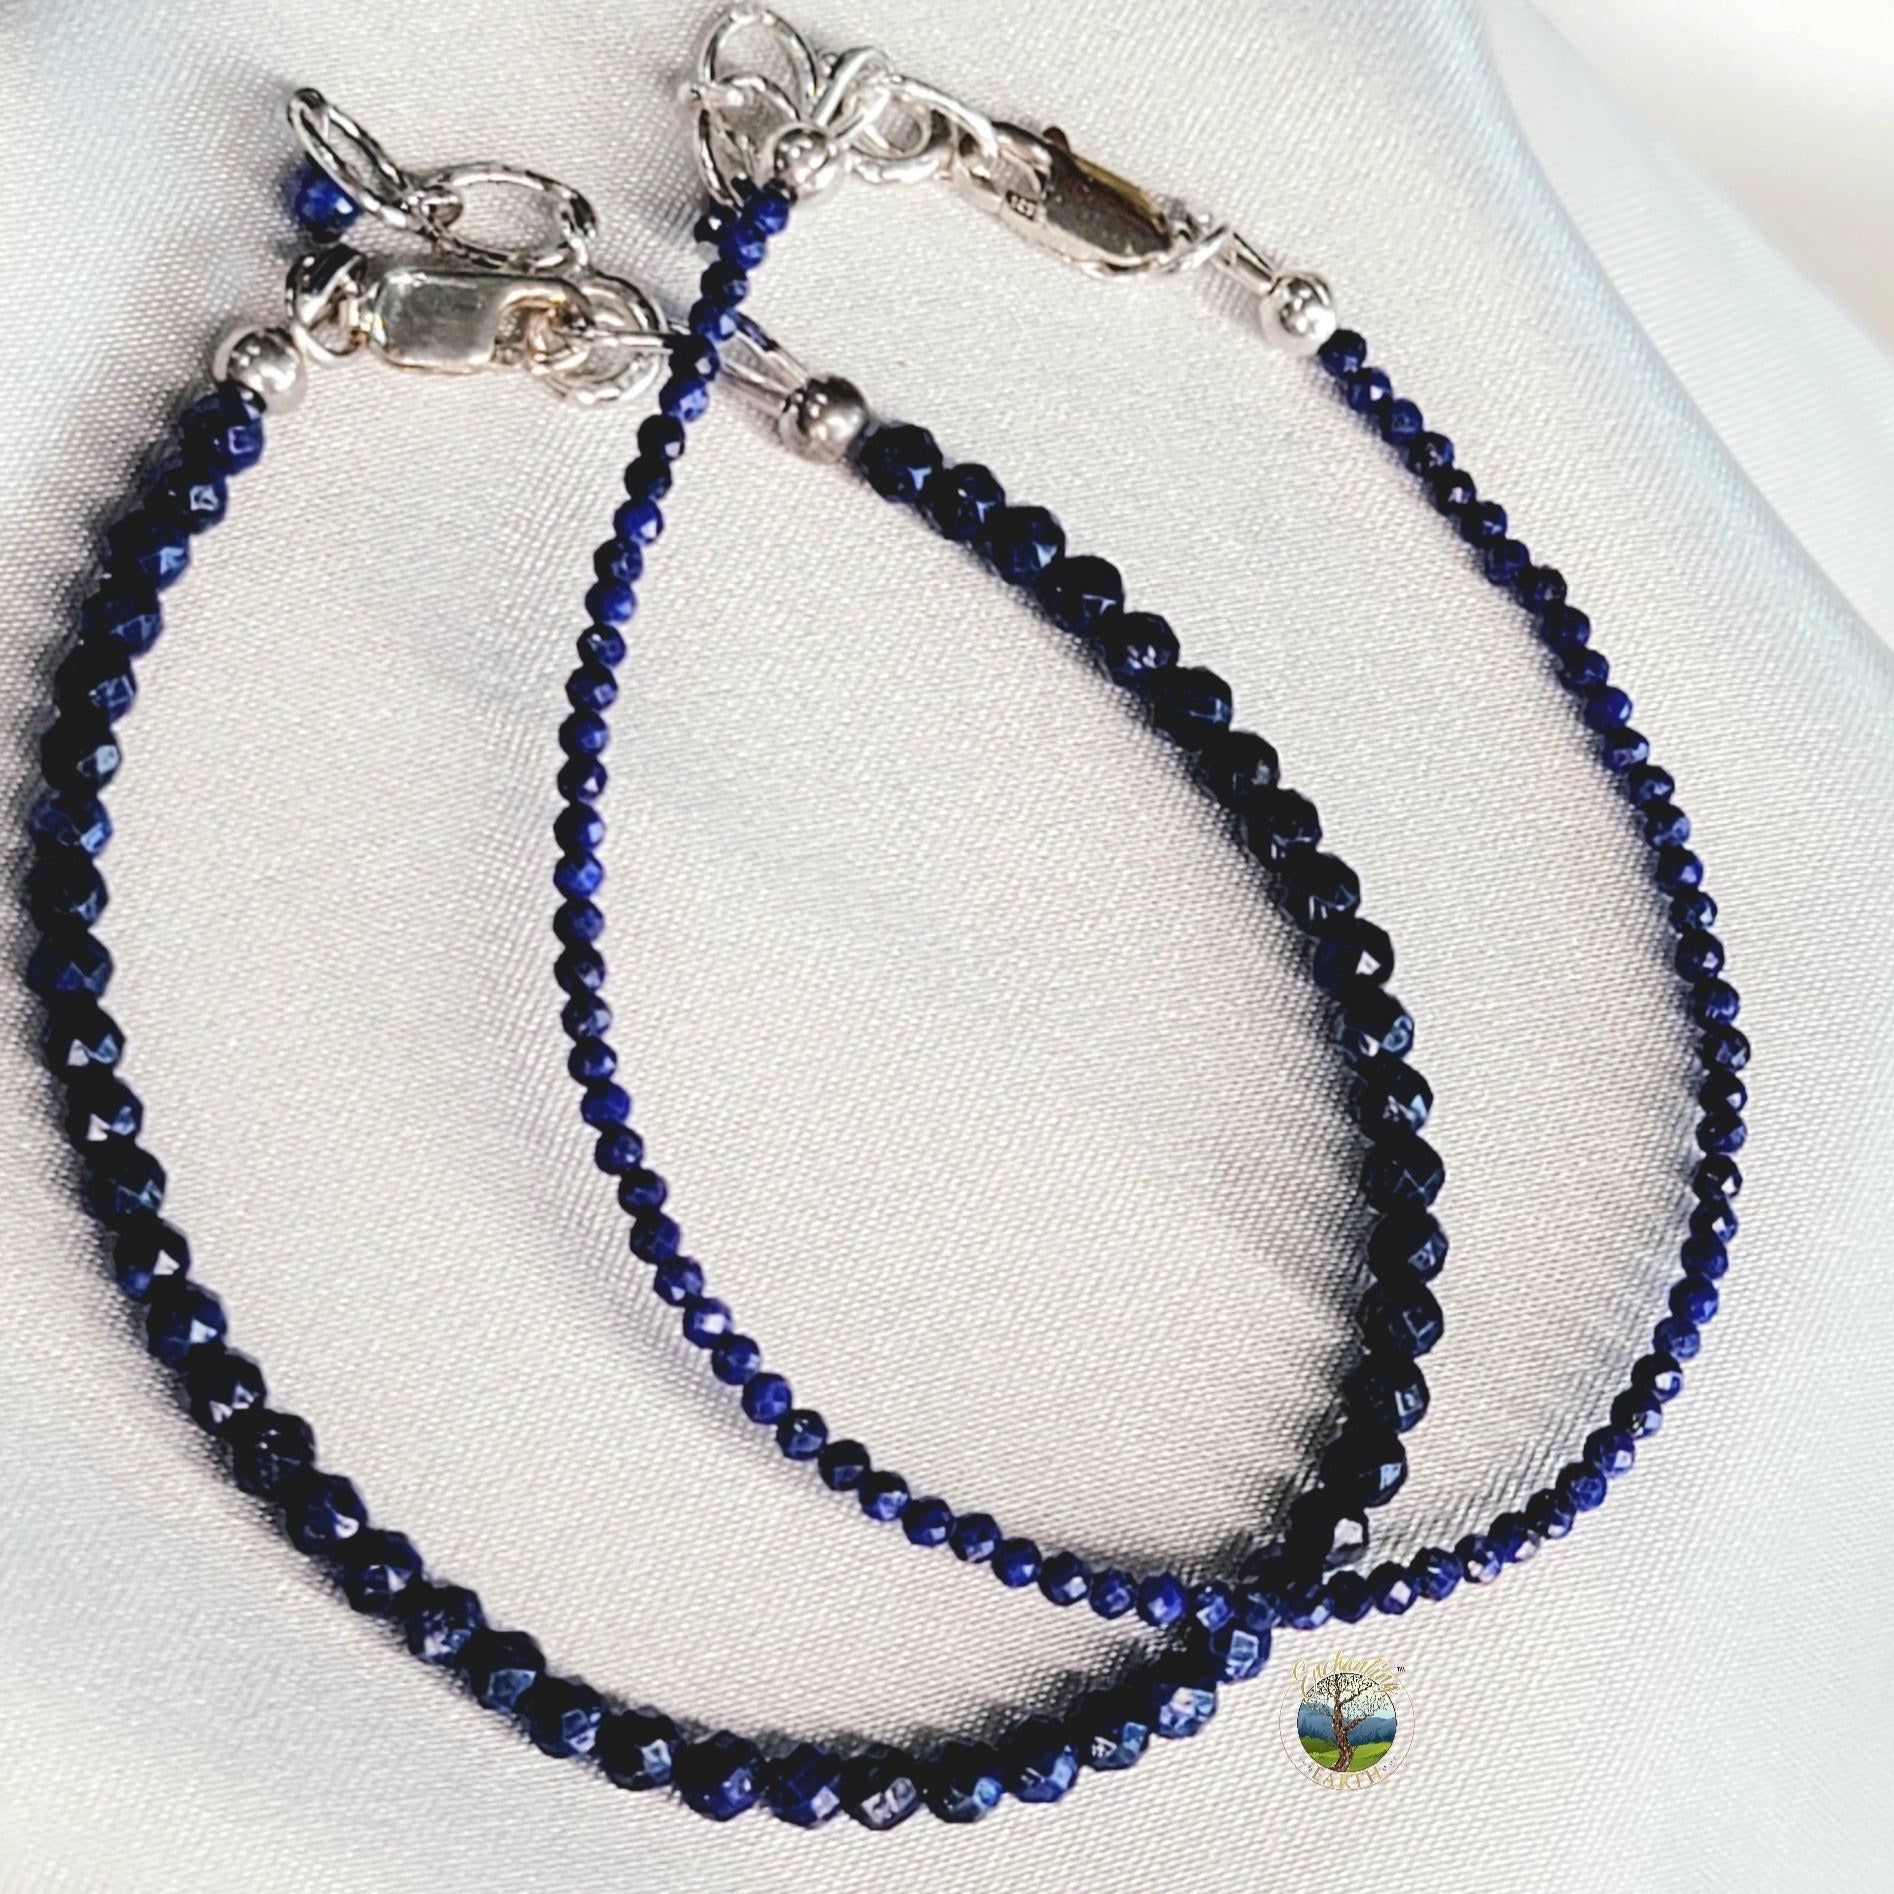 Lapis Lazuli Micro Faceted Bracelet for Confidence, Intuition and Power